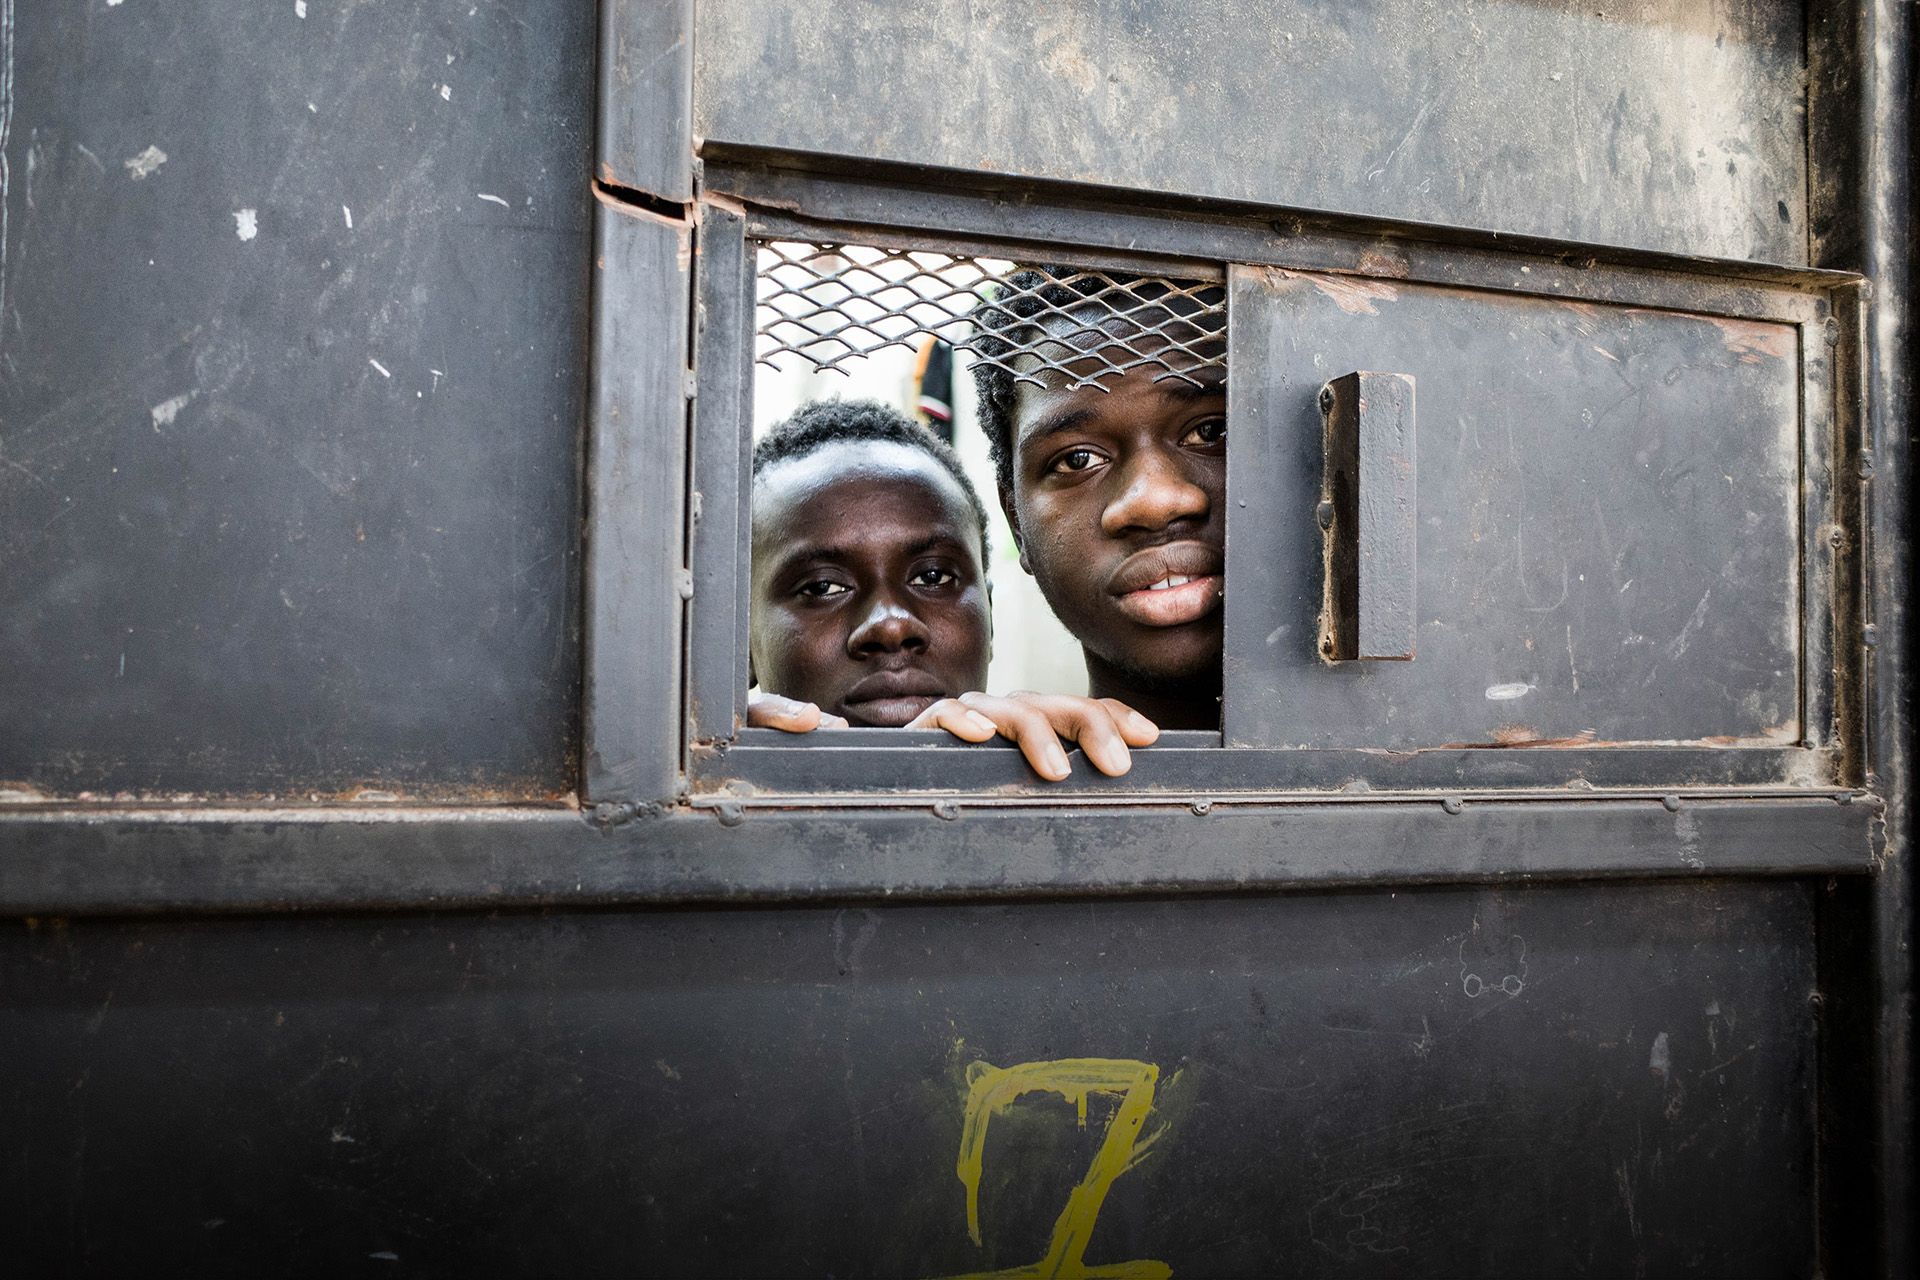 Detainees from West Africa peer out of their overcrowded cell in the al-Nasr detention center in Zawiya, Libya, where migrants intercepted by the Coast Guard in Zawiya are warehoused indefinitely. Image by Peter Tinti. Libya, 2017.